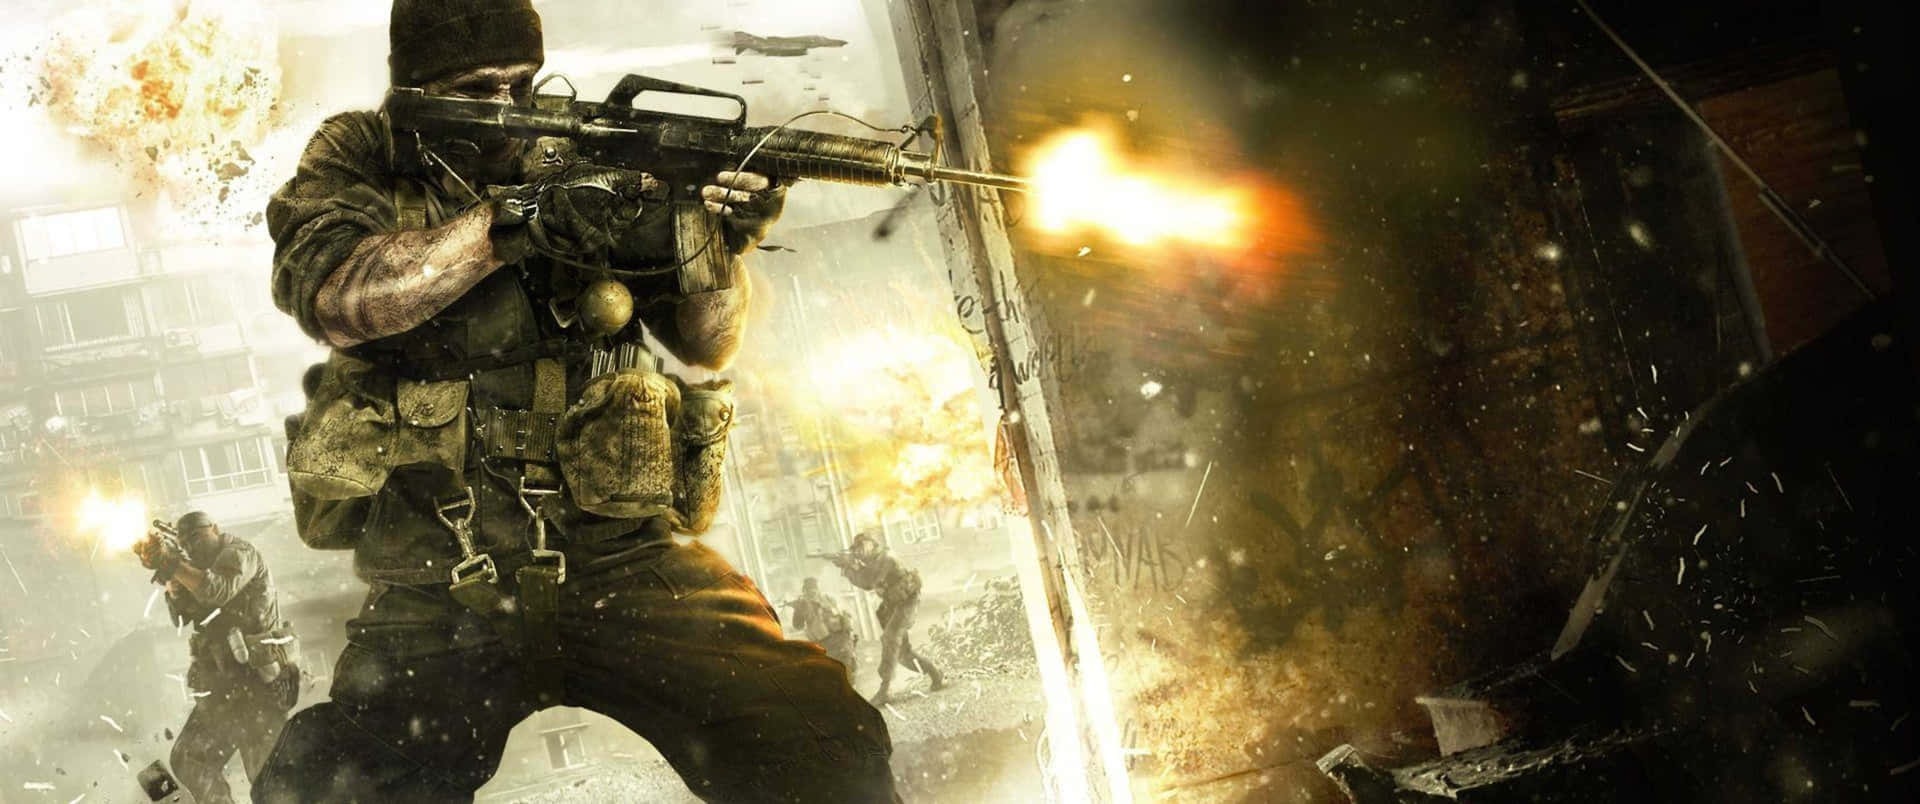 Call Of Duty Black Ops 2 HD Wide Wallpaper for Widescreen